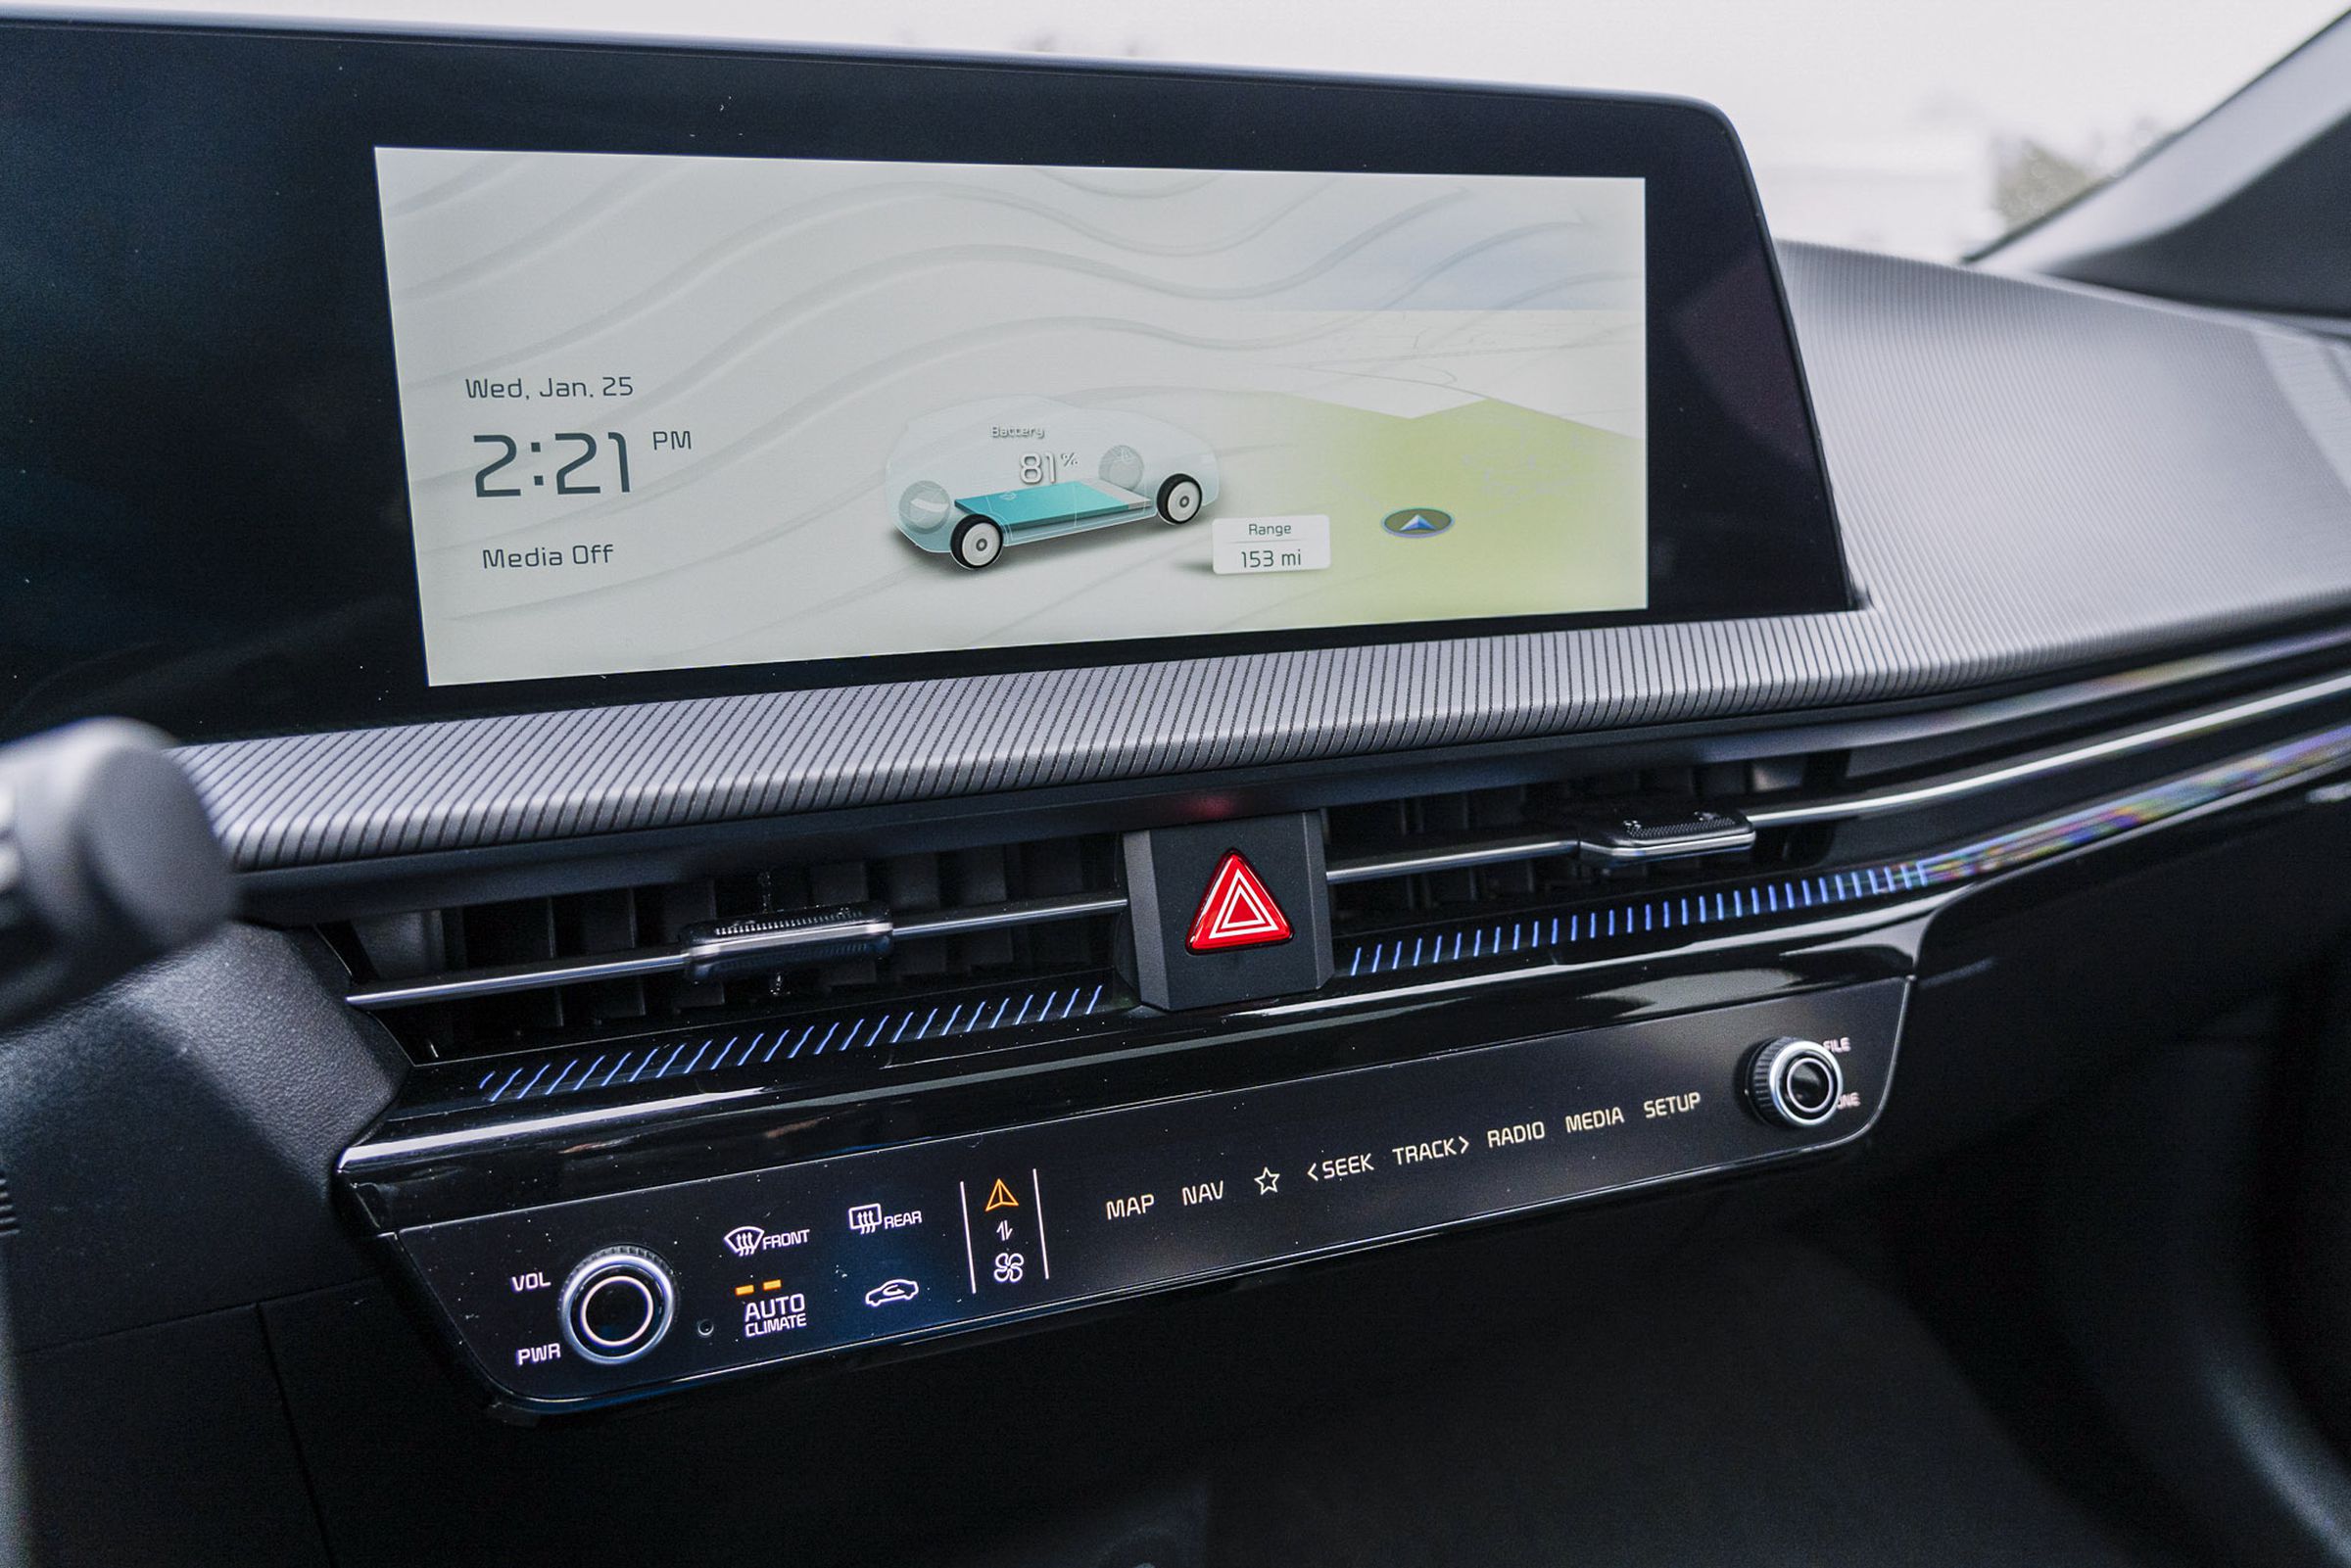 The UX is similar to other infotainment screens found across Hyundai and Kia’s lineup.